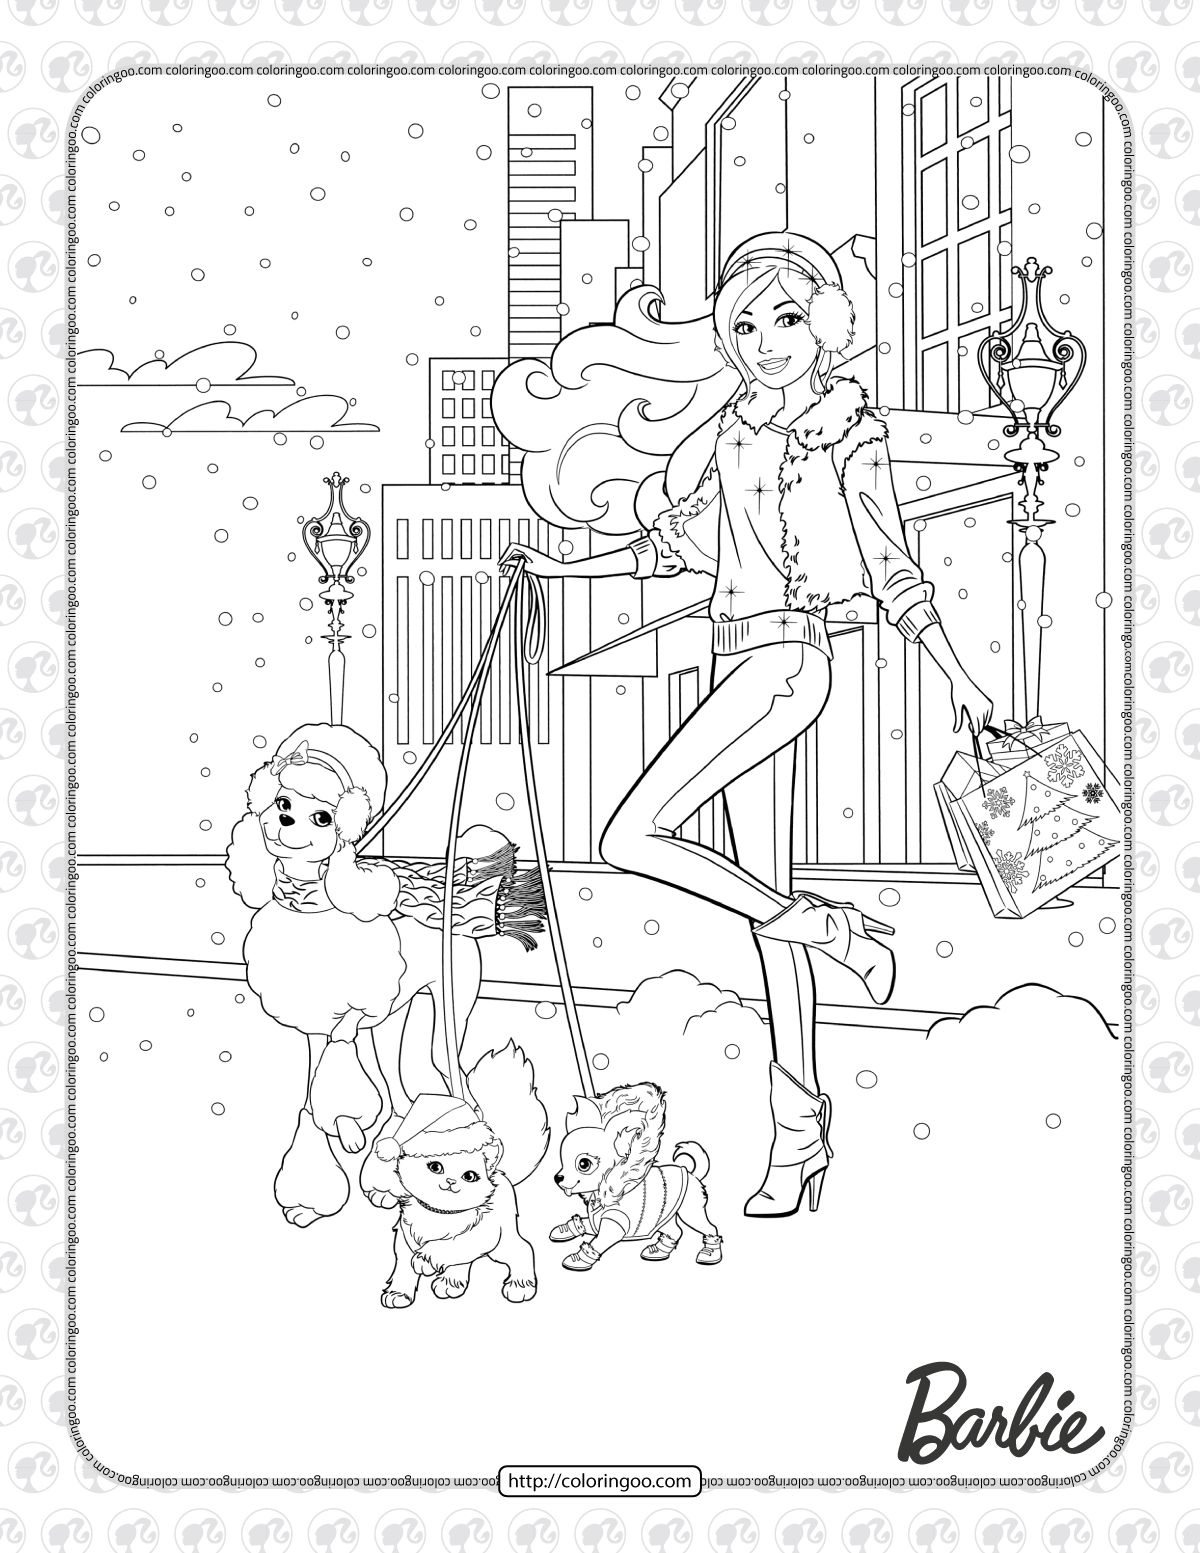 barbie shopping with her pets coloring page